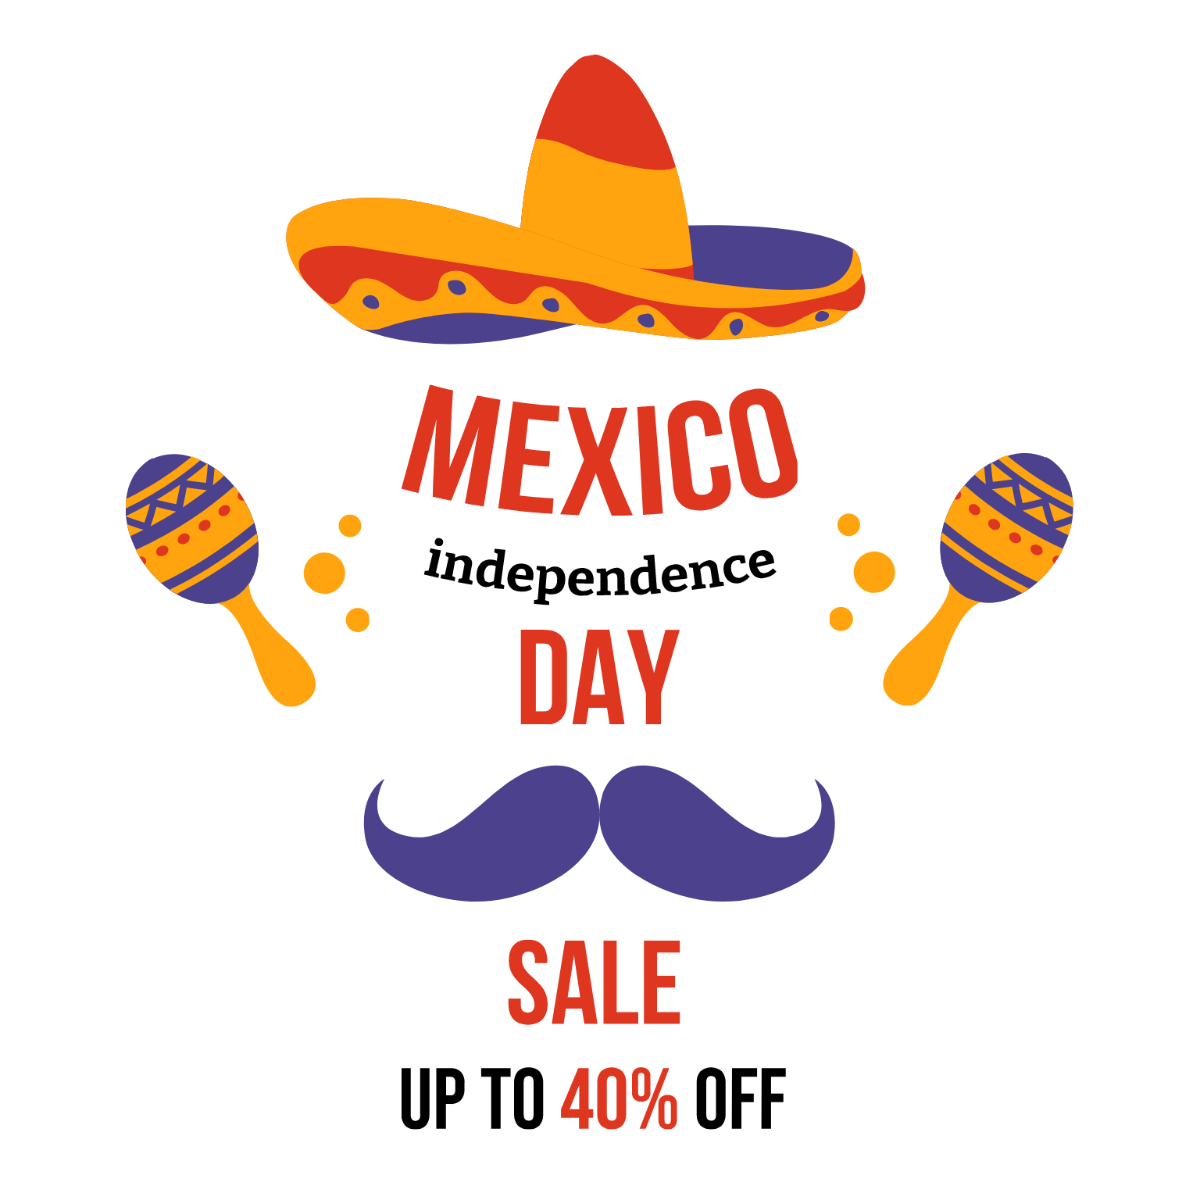 Free Mexican Independence Day Sale Illustration Template